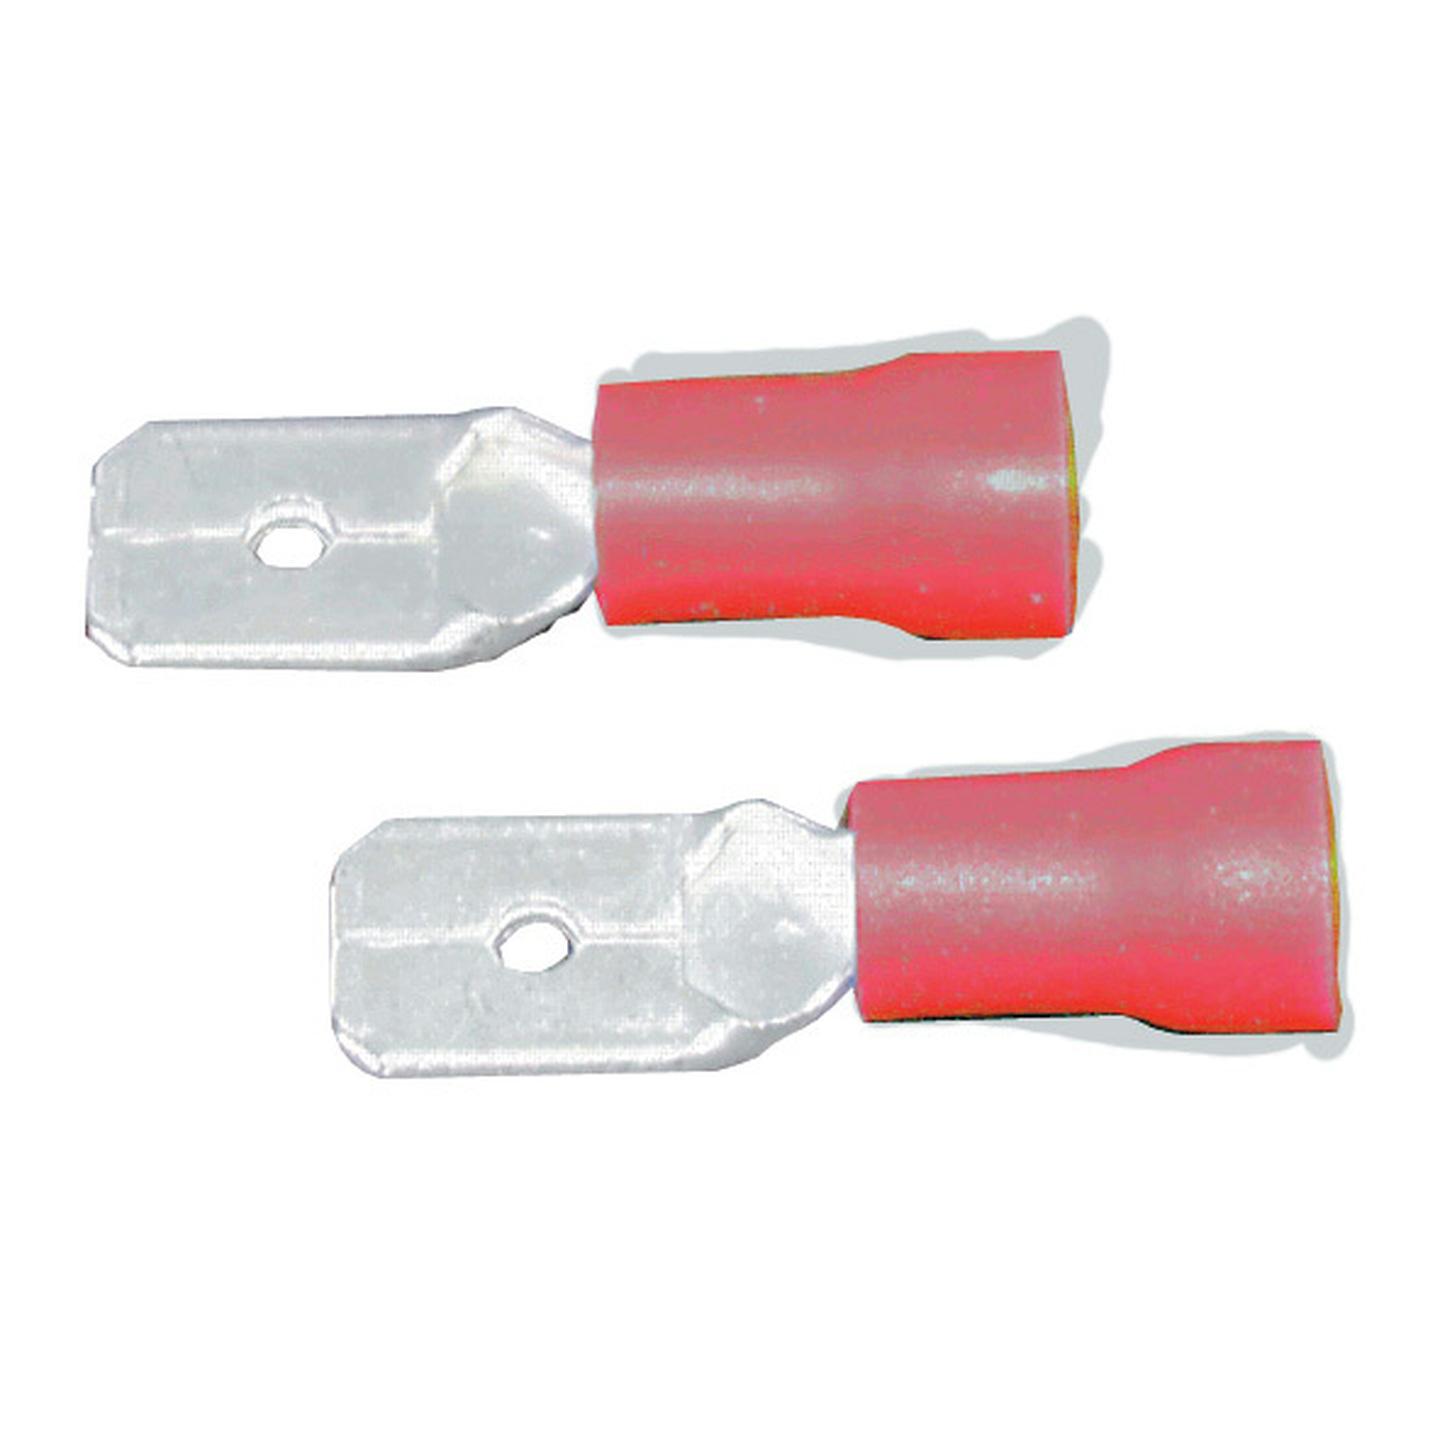 Male Spade - Red - Pack of 8